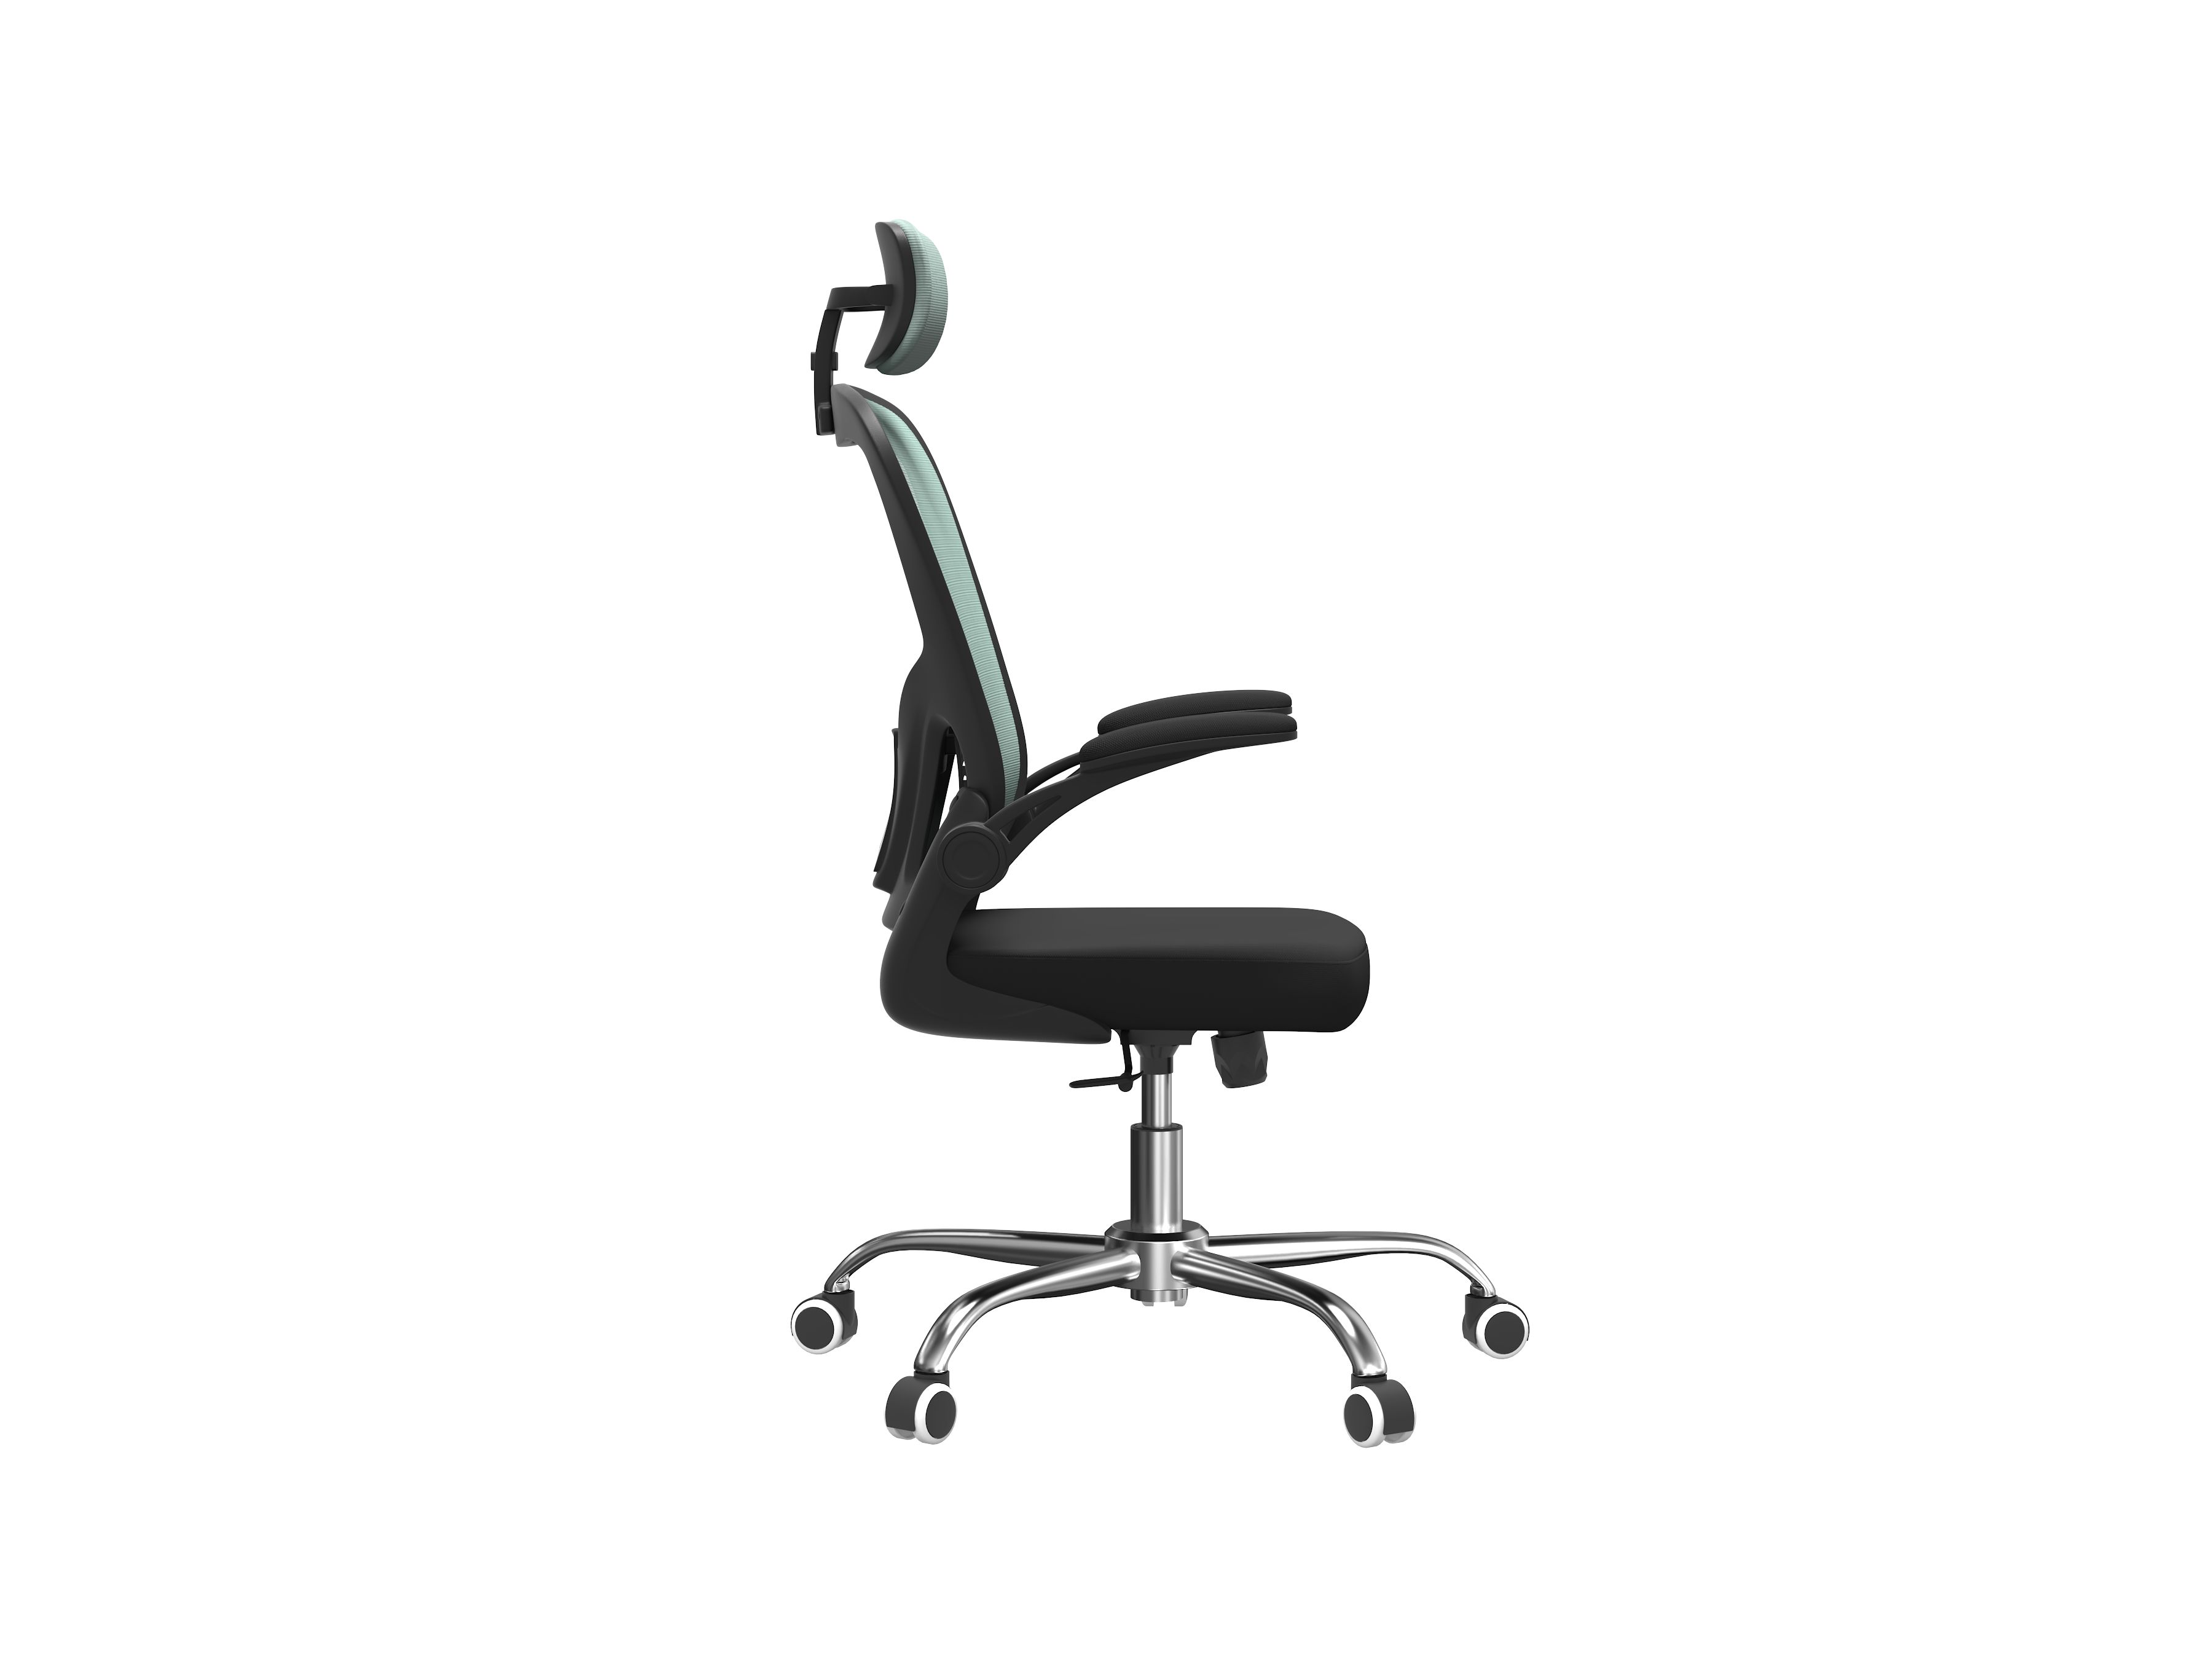 Topeshop FOTEL DORY NIEBIESKI office/computer chair Padded seat Mesh backrest_4